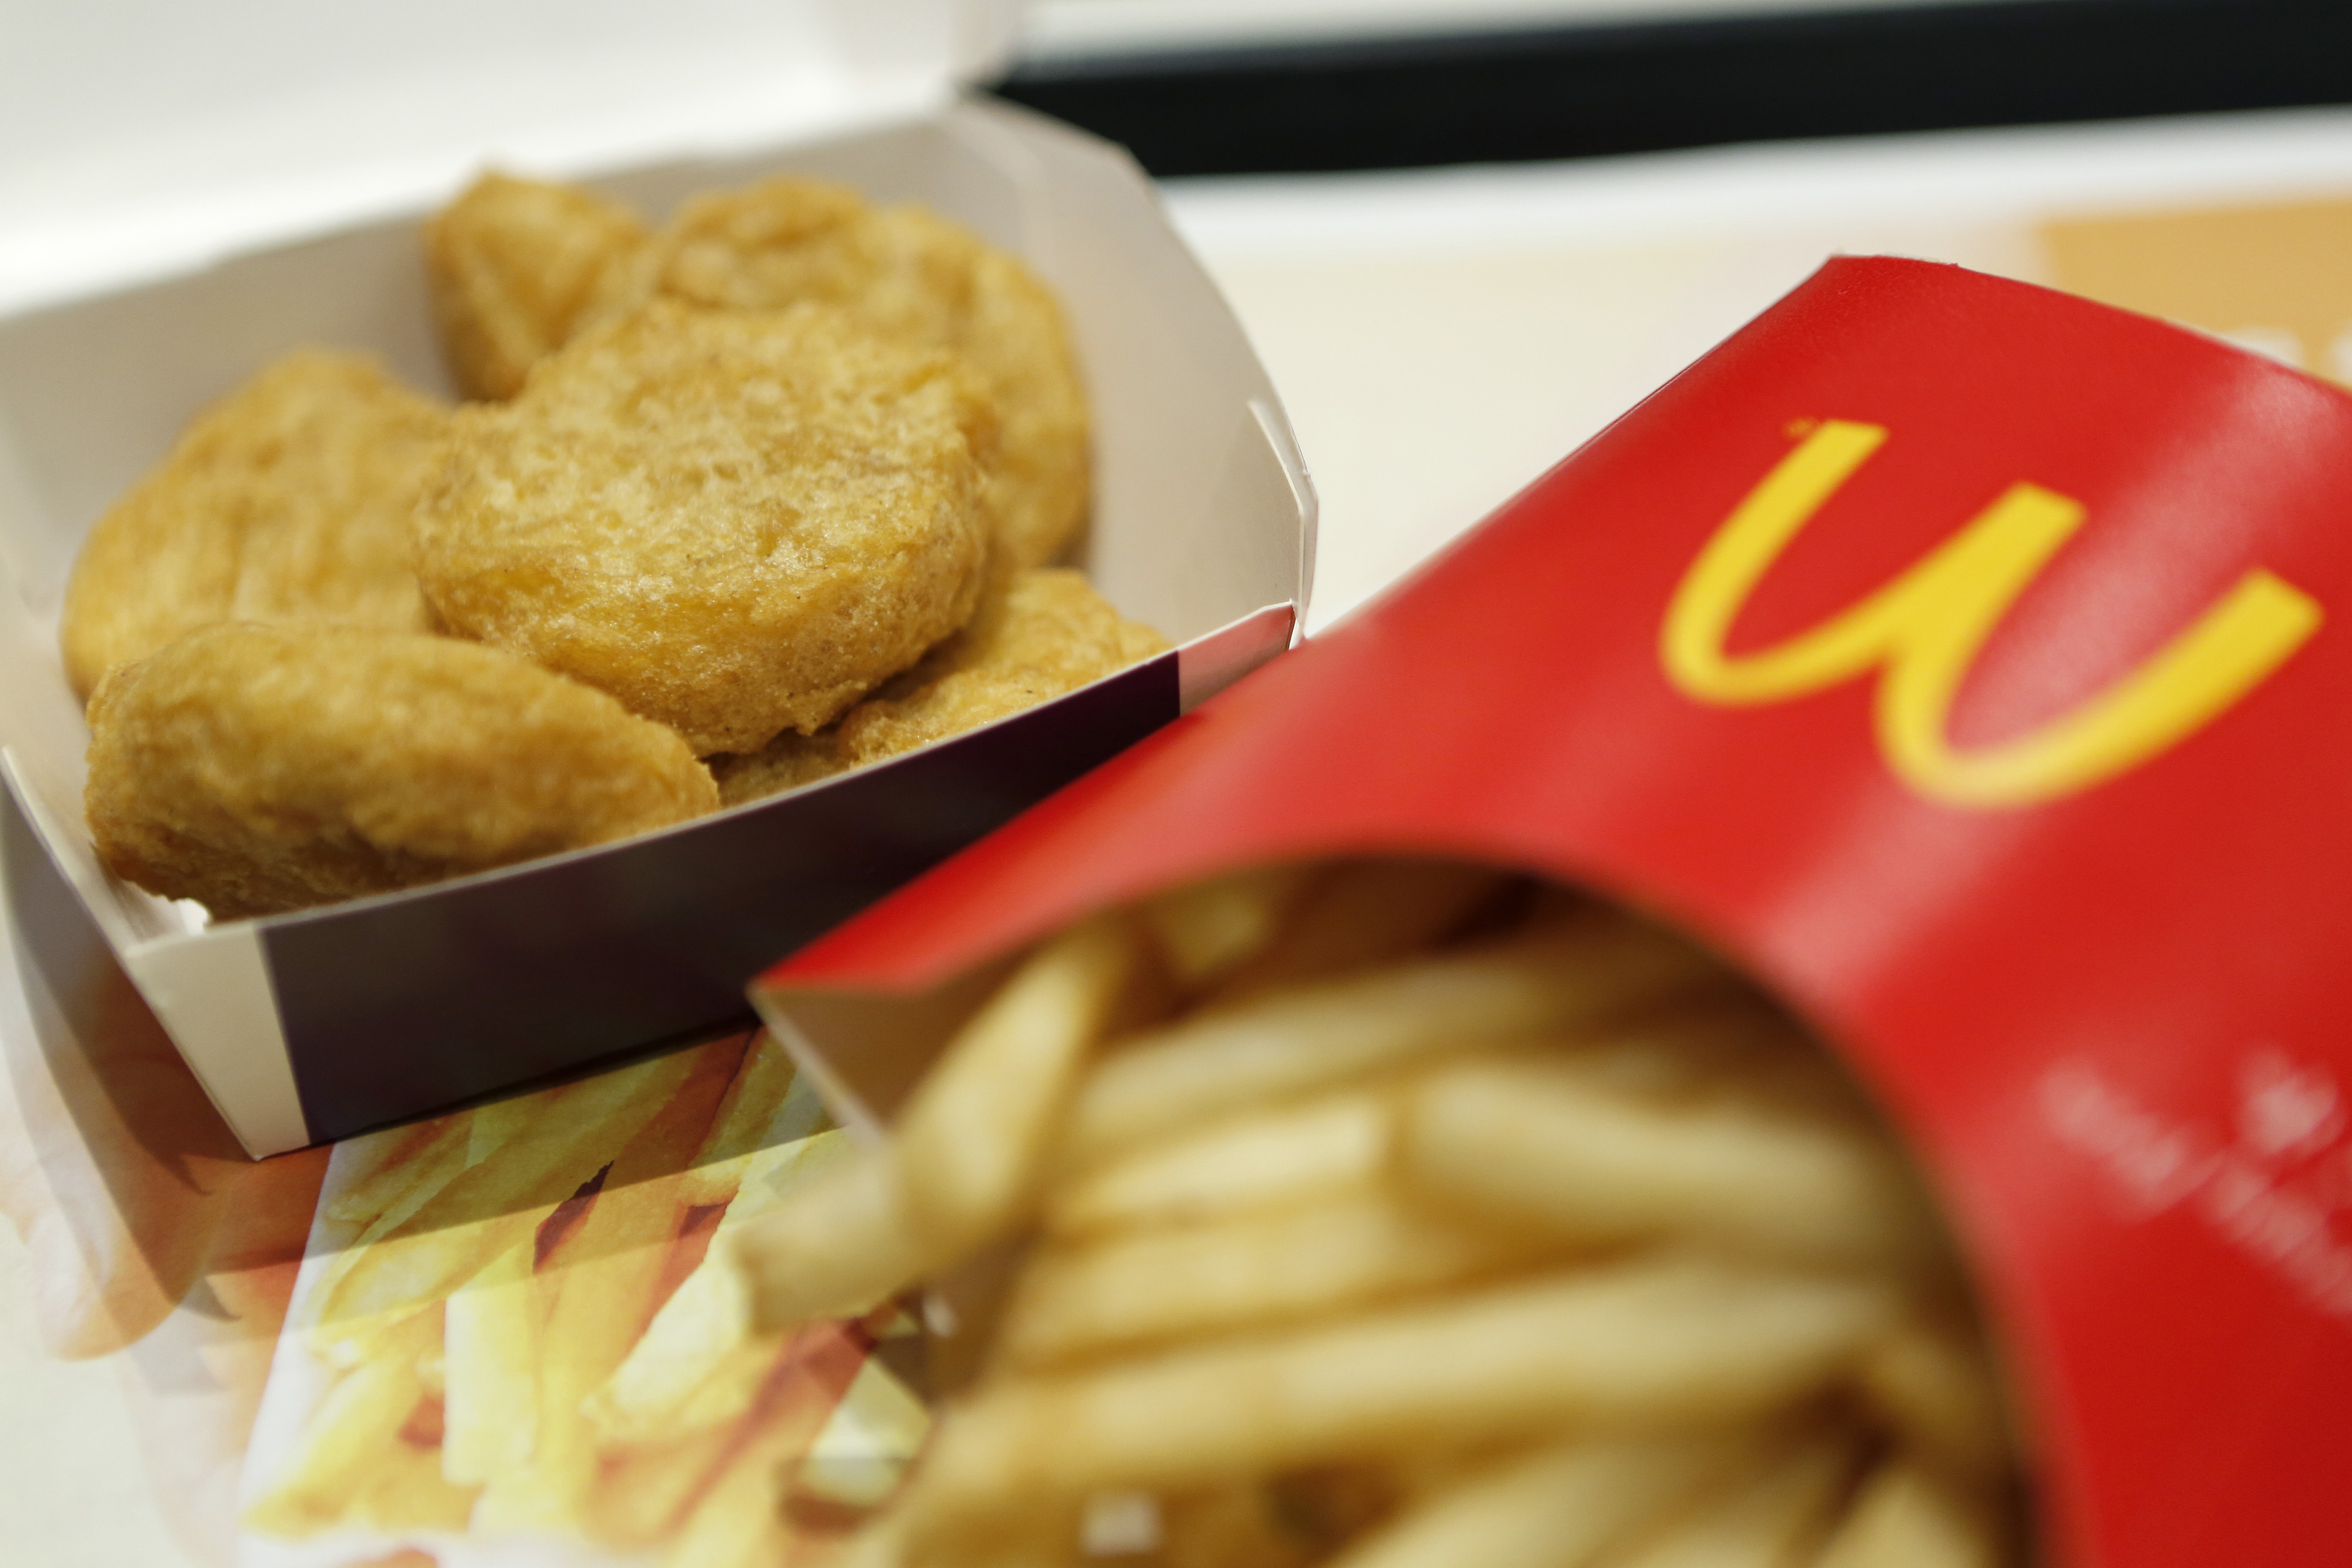 A box of chicken nuggets, left, sits beside a portion of french fries at a McDonald's restaurant, operated by McDonald's Holdings Co. Japan Ltd., in Tokyo, Japan, on Jan.7, 2015. (Bloomberg—Getty Images)